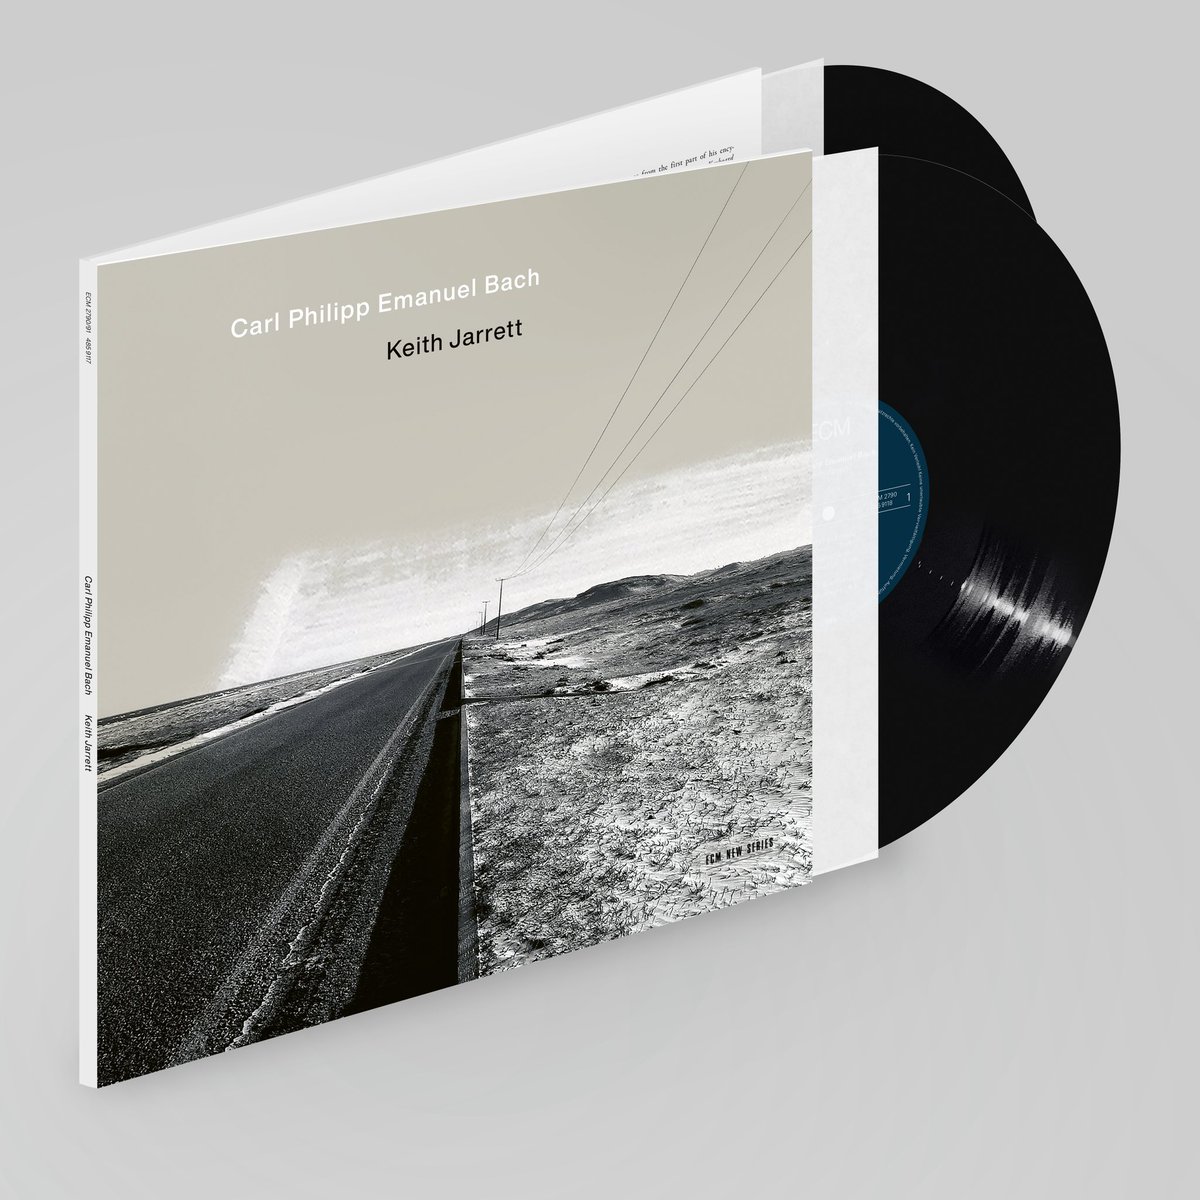 Keith Jarrett’s interpretation of ‘Carl Philipp Emanuel Bach: Württemberg Sonatas’ is available as a double album on vinyl, CD and digitally. Get your copy here: ECM.lnk.to/CarlPhilippEma…